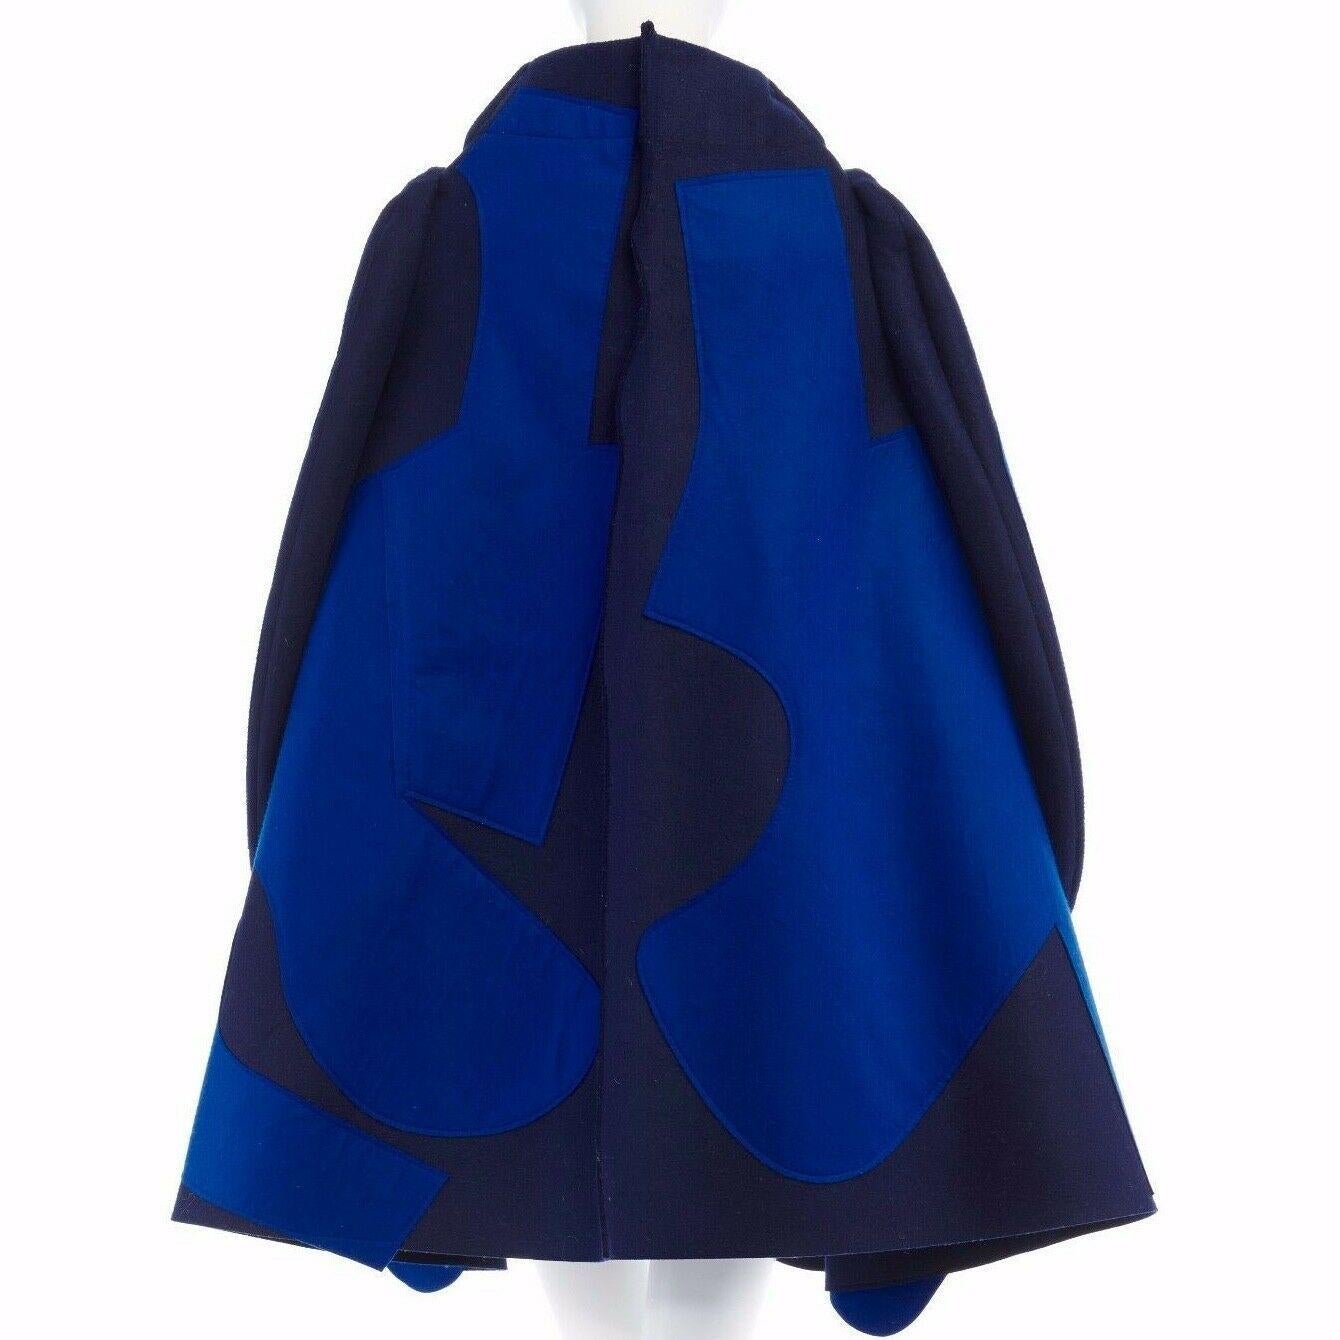 new COMME DES GARCONS AD2012 flatpacked 2D blue abstract shape wool felt coat XS 2